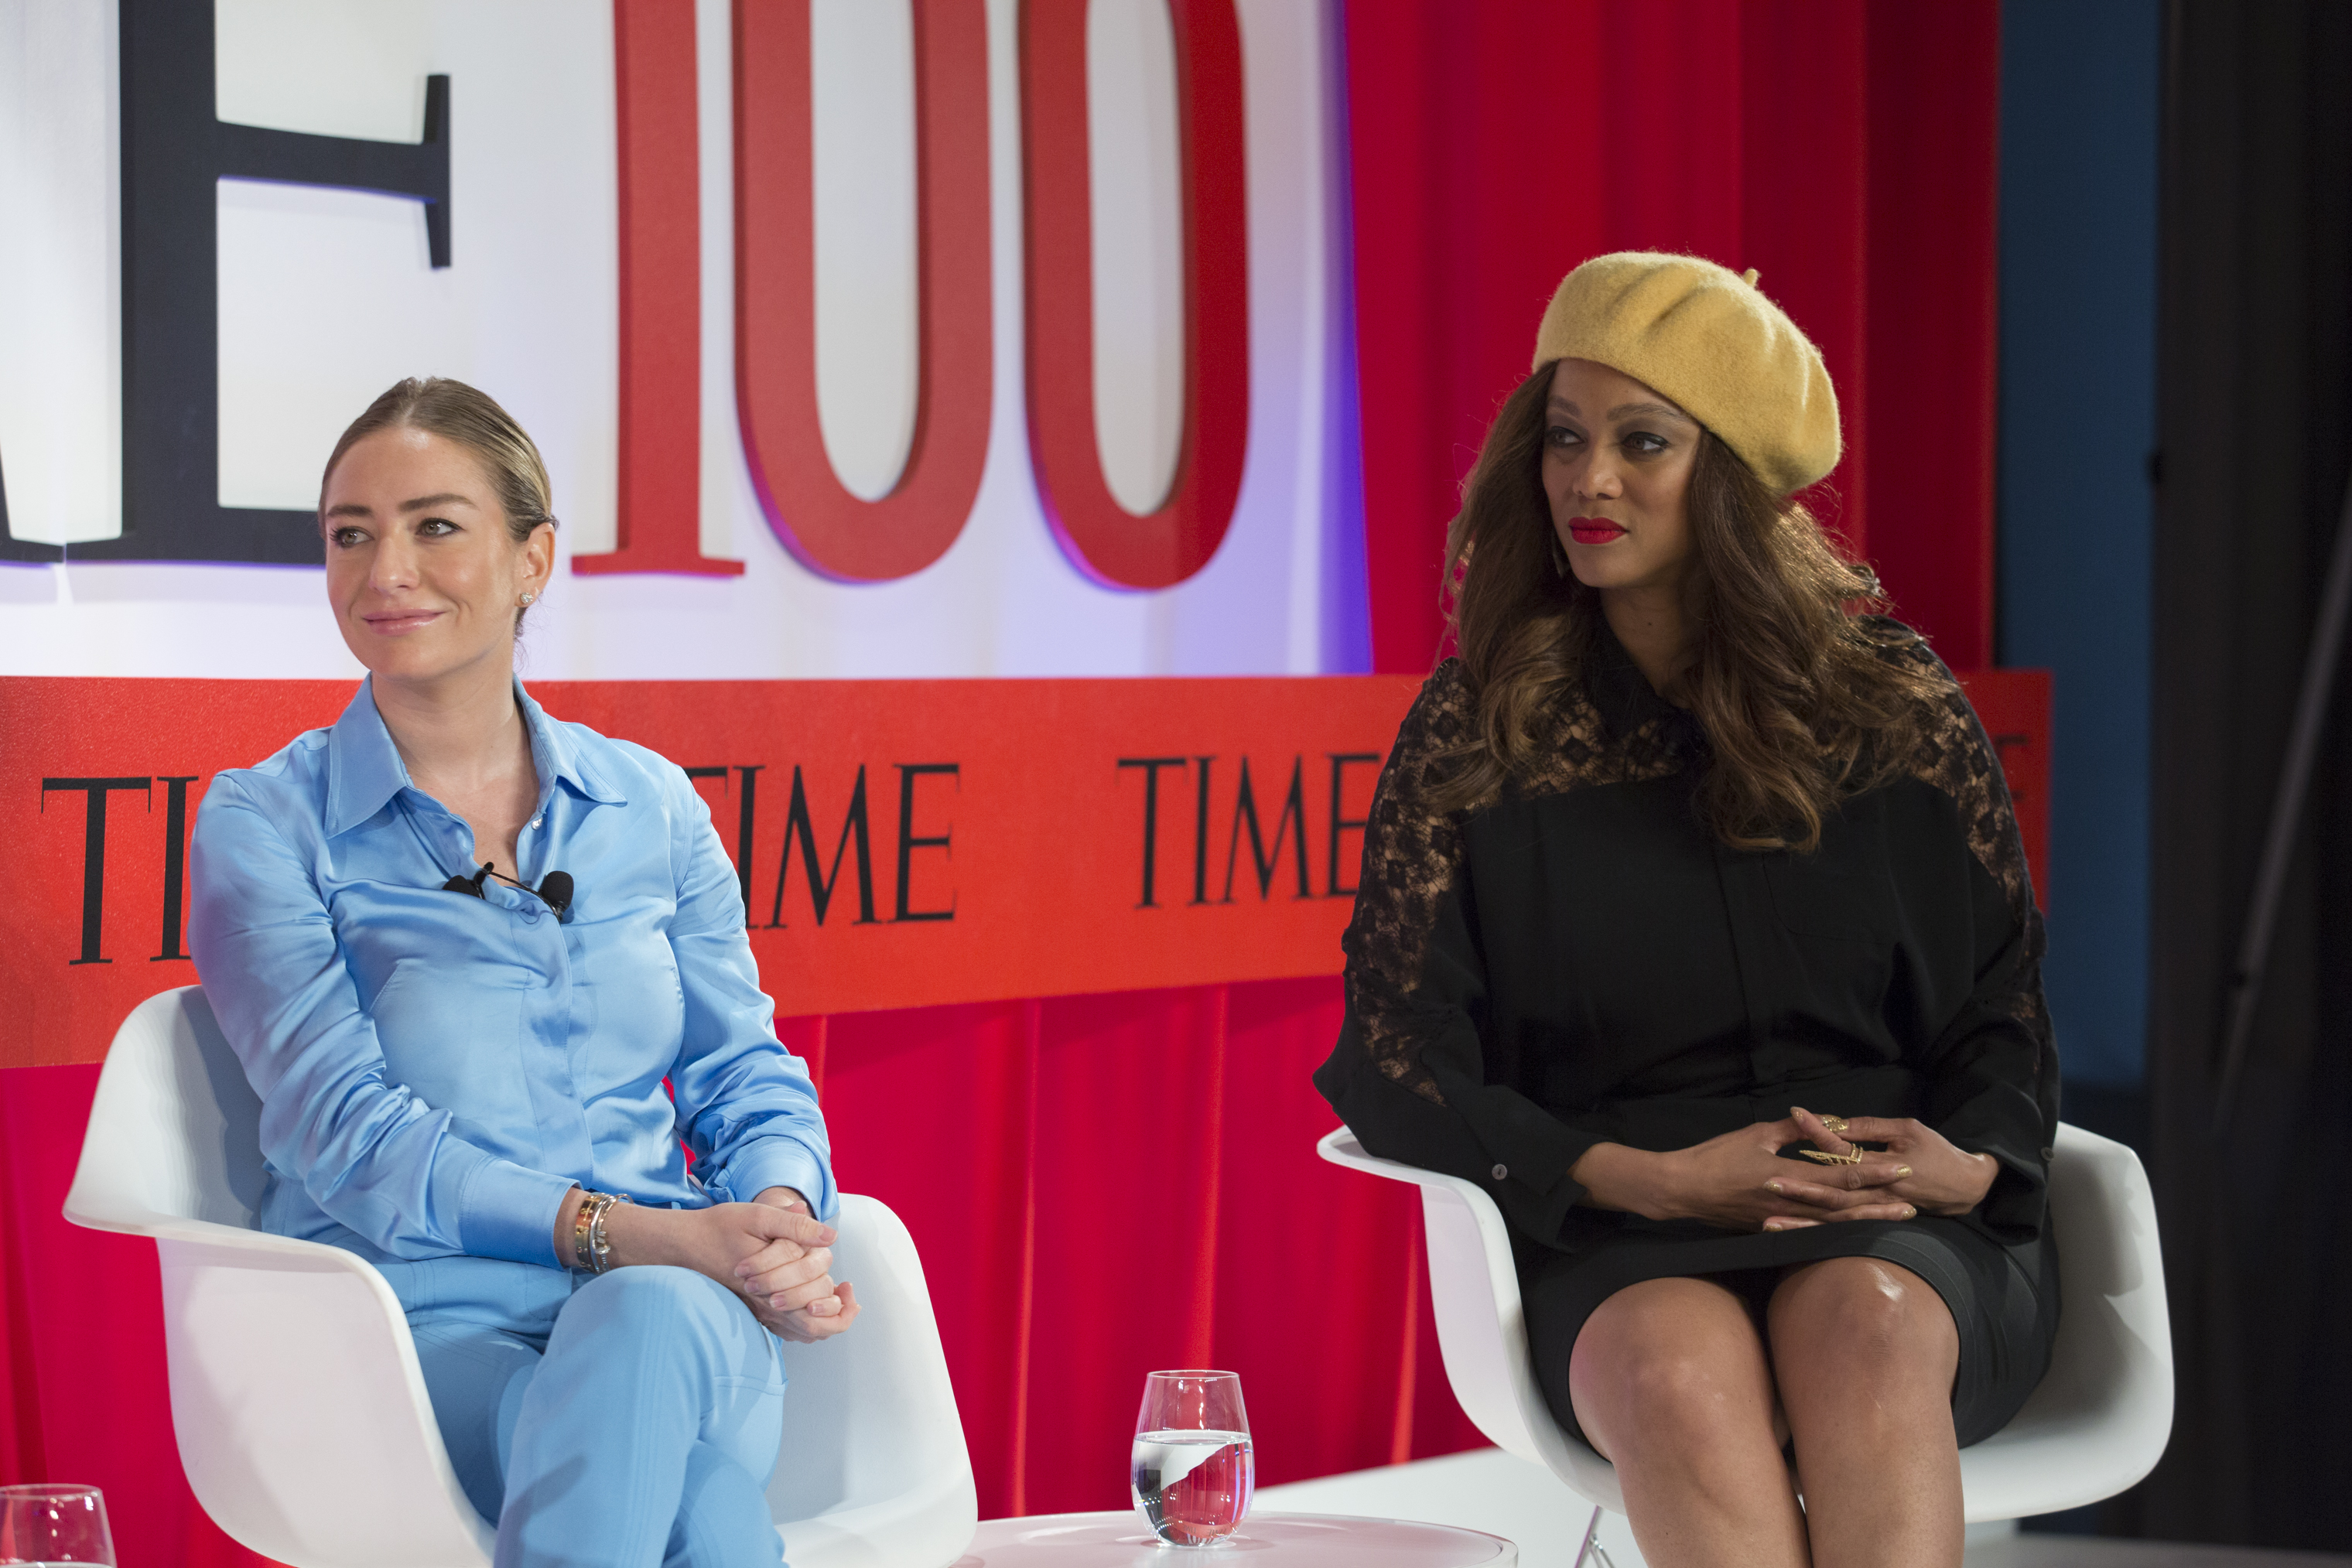 (L-R) Whitney Wolfe Herd and Tyra Banks participate in a panel on Empowering Women in Business at the TIME100 Summit in New York, on April 23, 2019. (Krisanne Johnson for TIME)